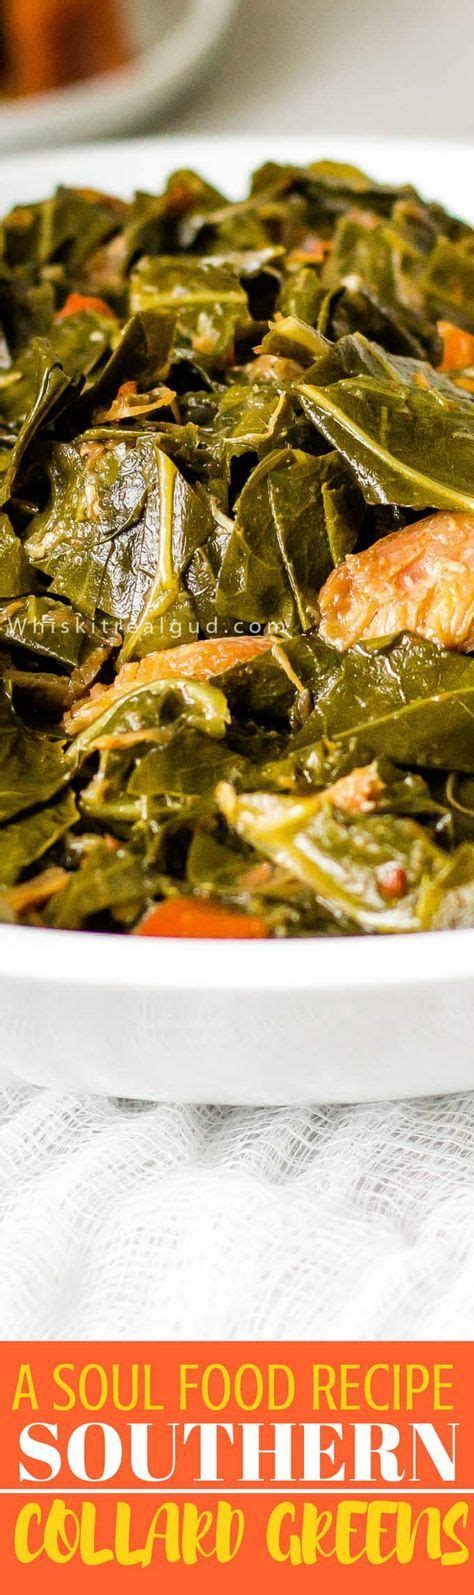 One bunch of large collard greens is 8 to 10 large leaves or 1 1/2 to 2 pounds. Soul Food Southern Collard Greens Recipe | Recipe | Greens ...